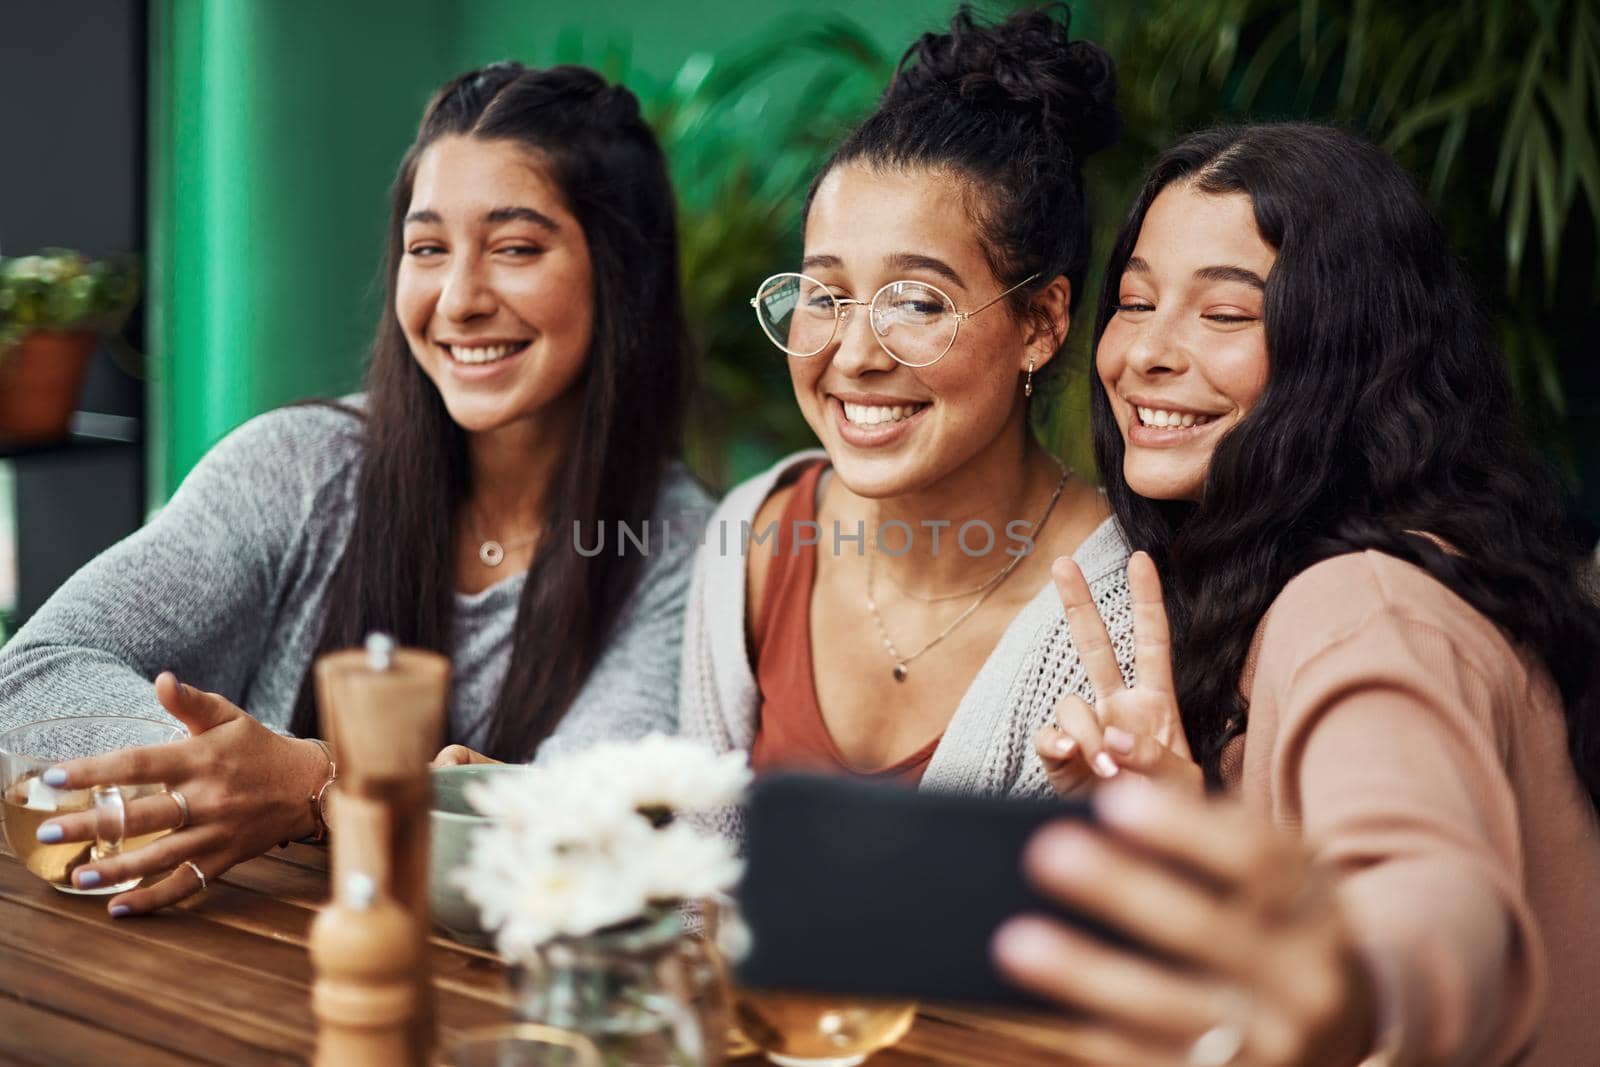 Sister time is selfie time. young sisters taking selfies together at a cafe